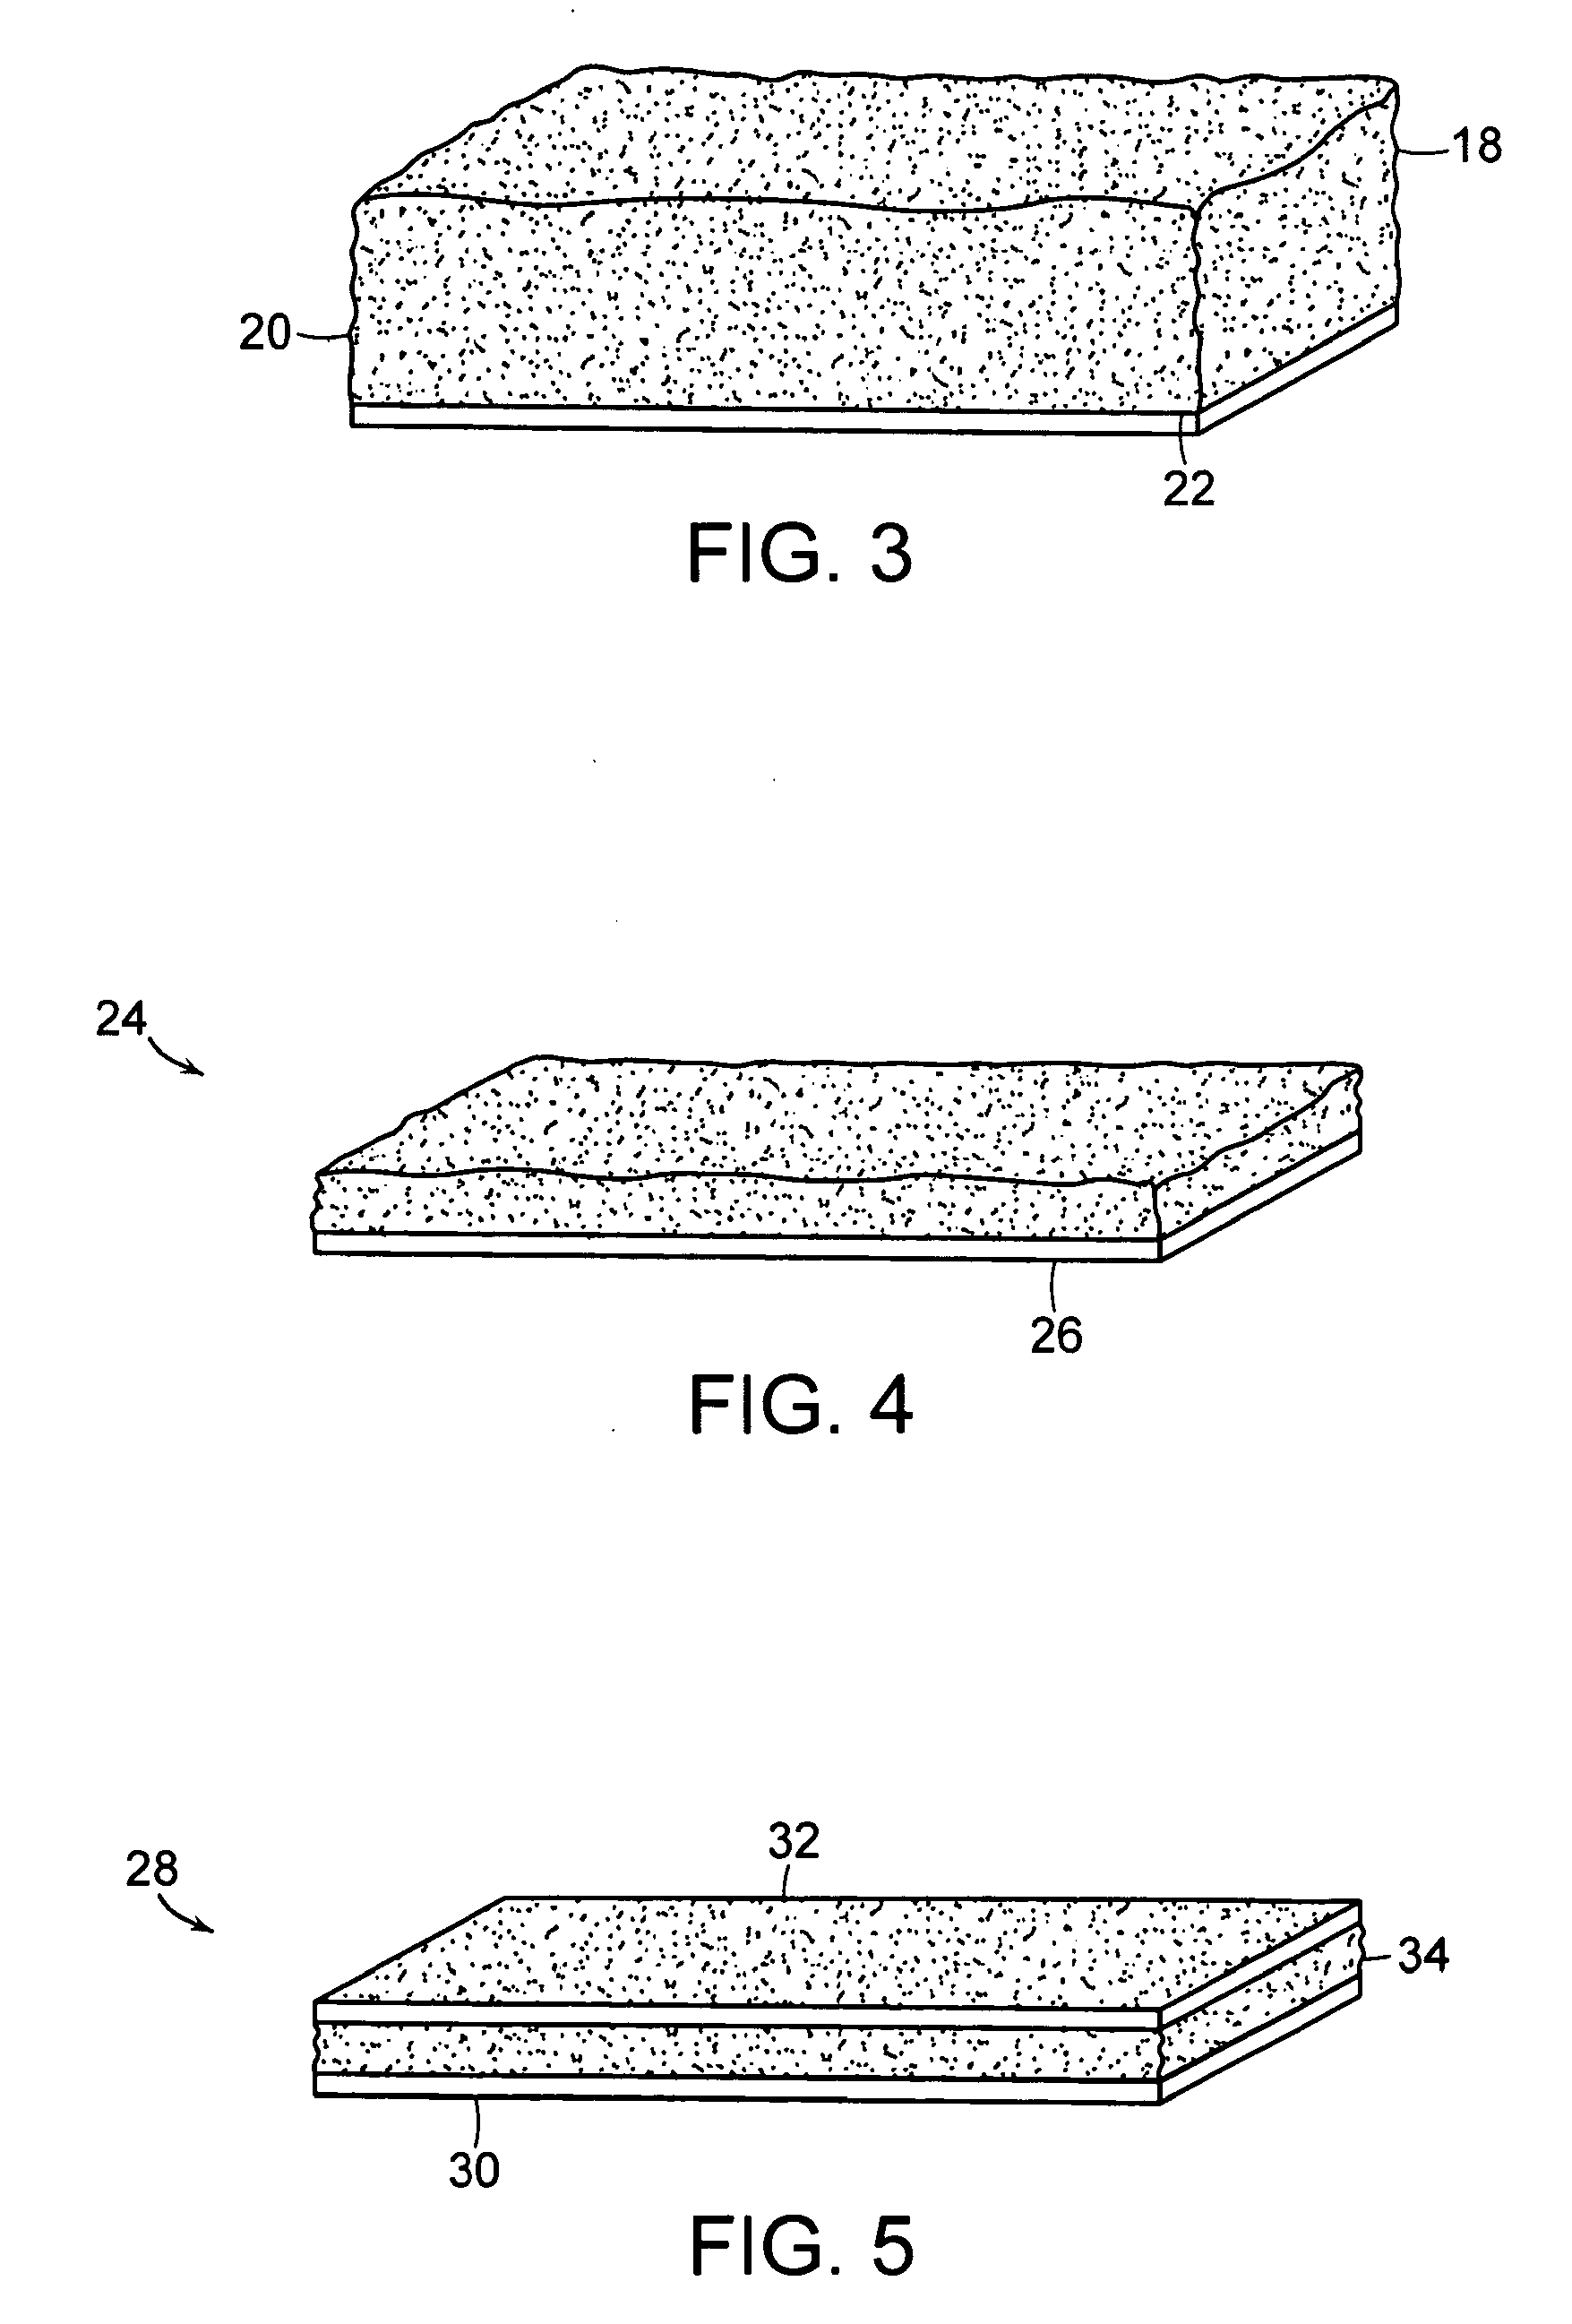 Filtering system for a semiconductor processing tool